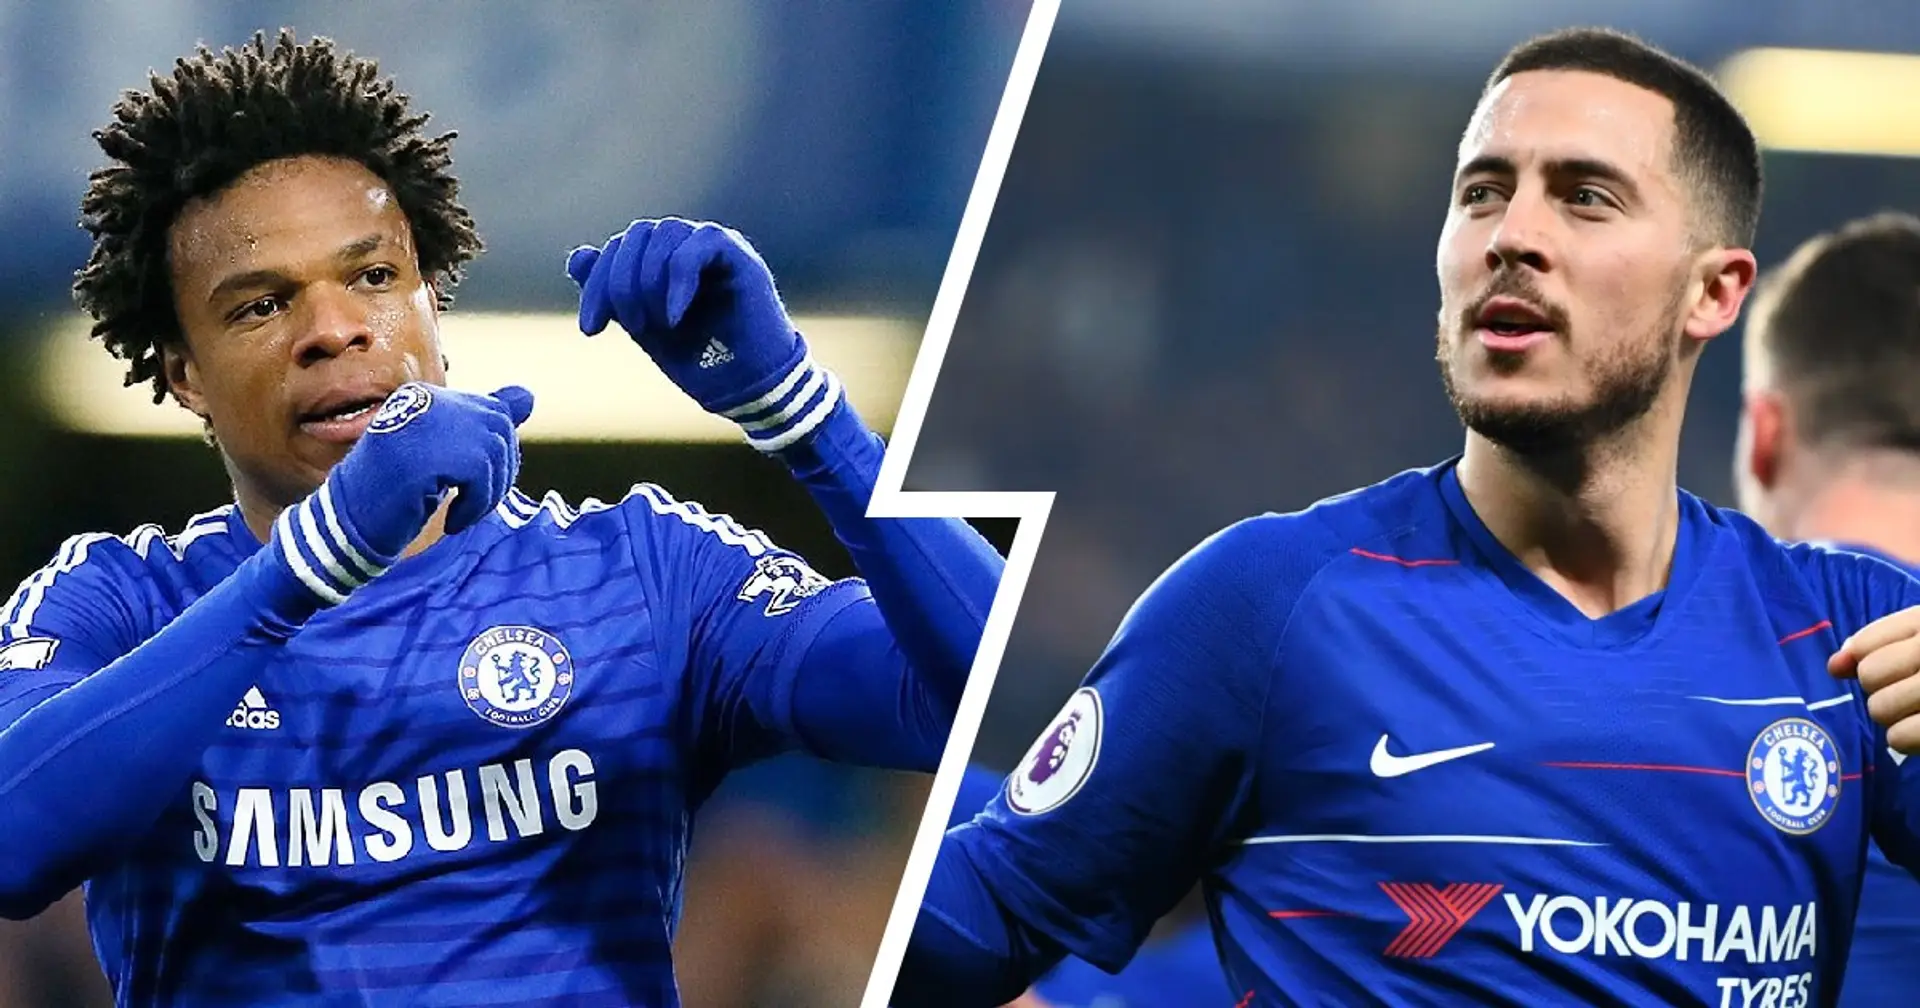 'I am the boss!' - How Hazard convinced former Chelsea team-mate Remy of his 'genius'